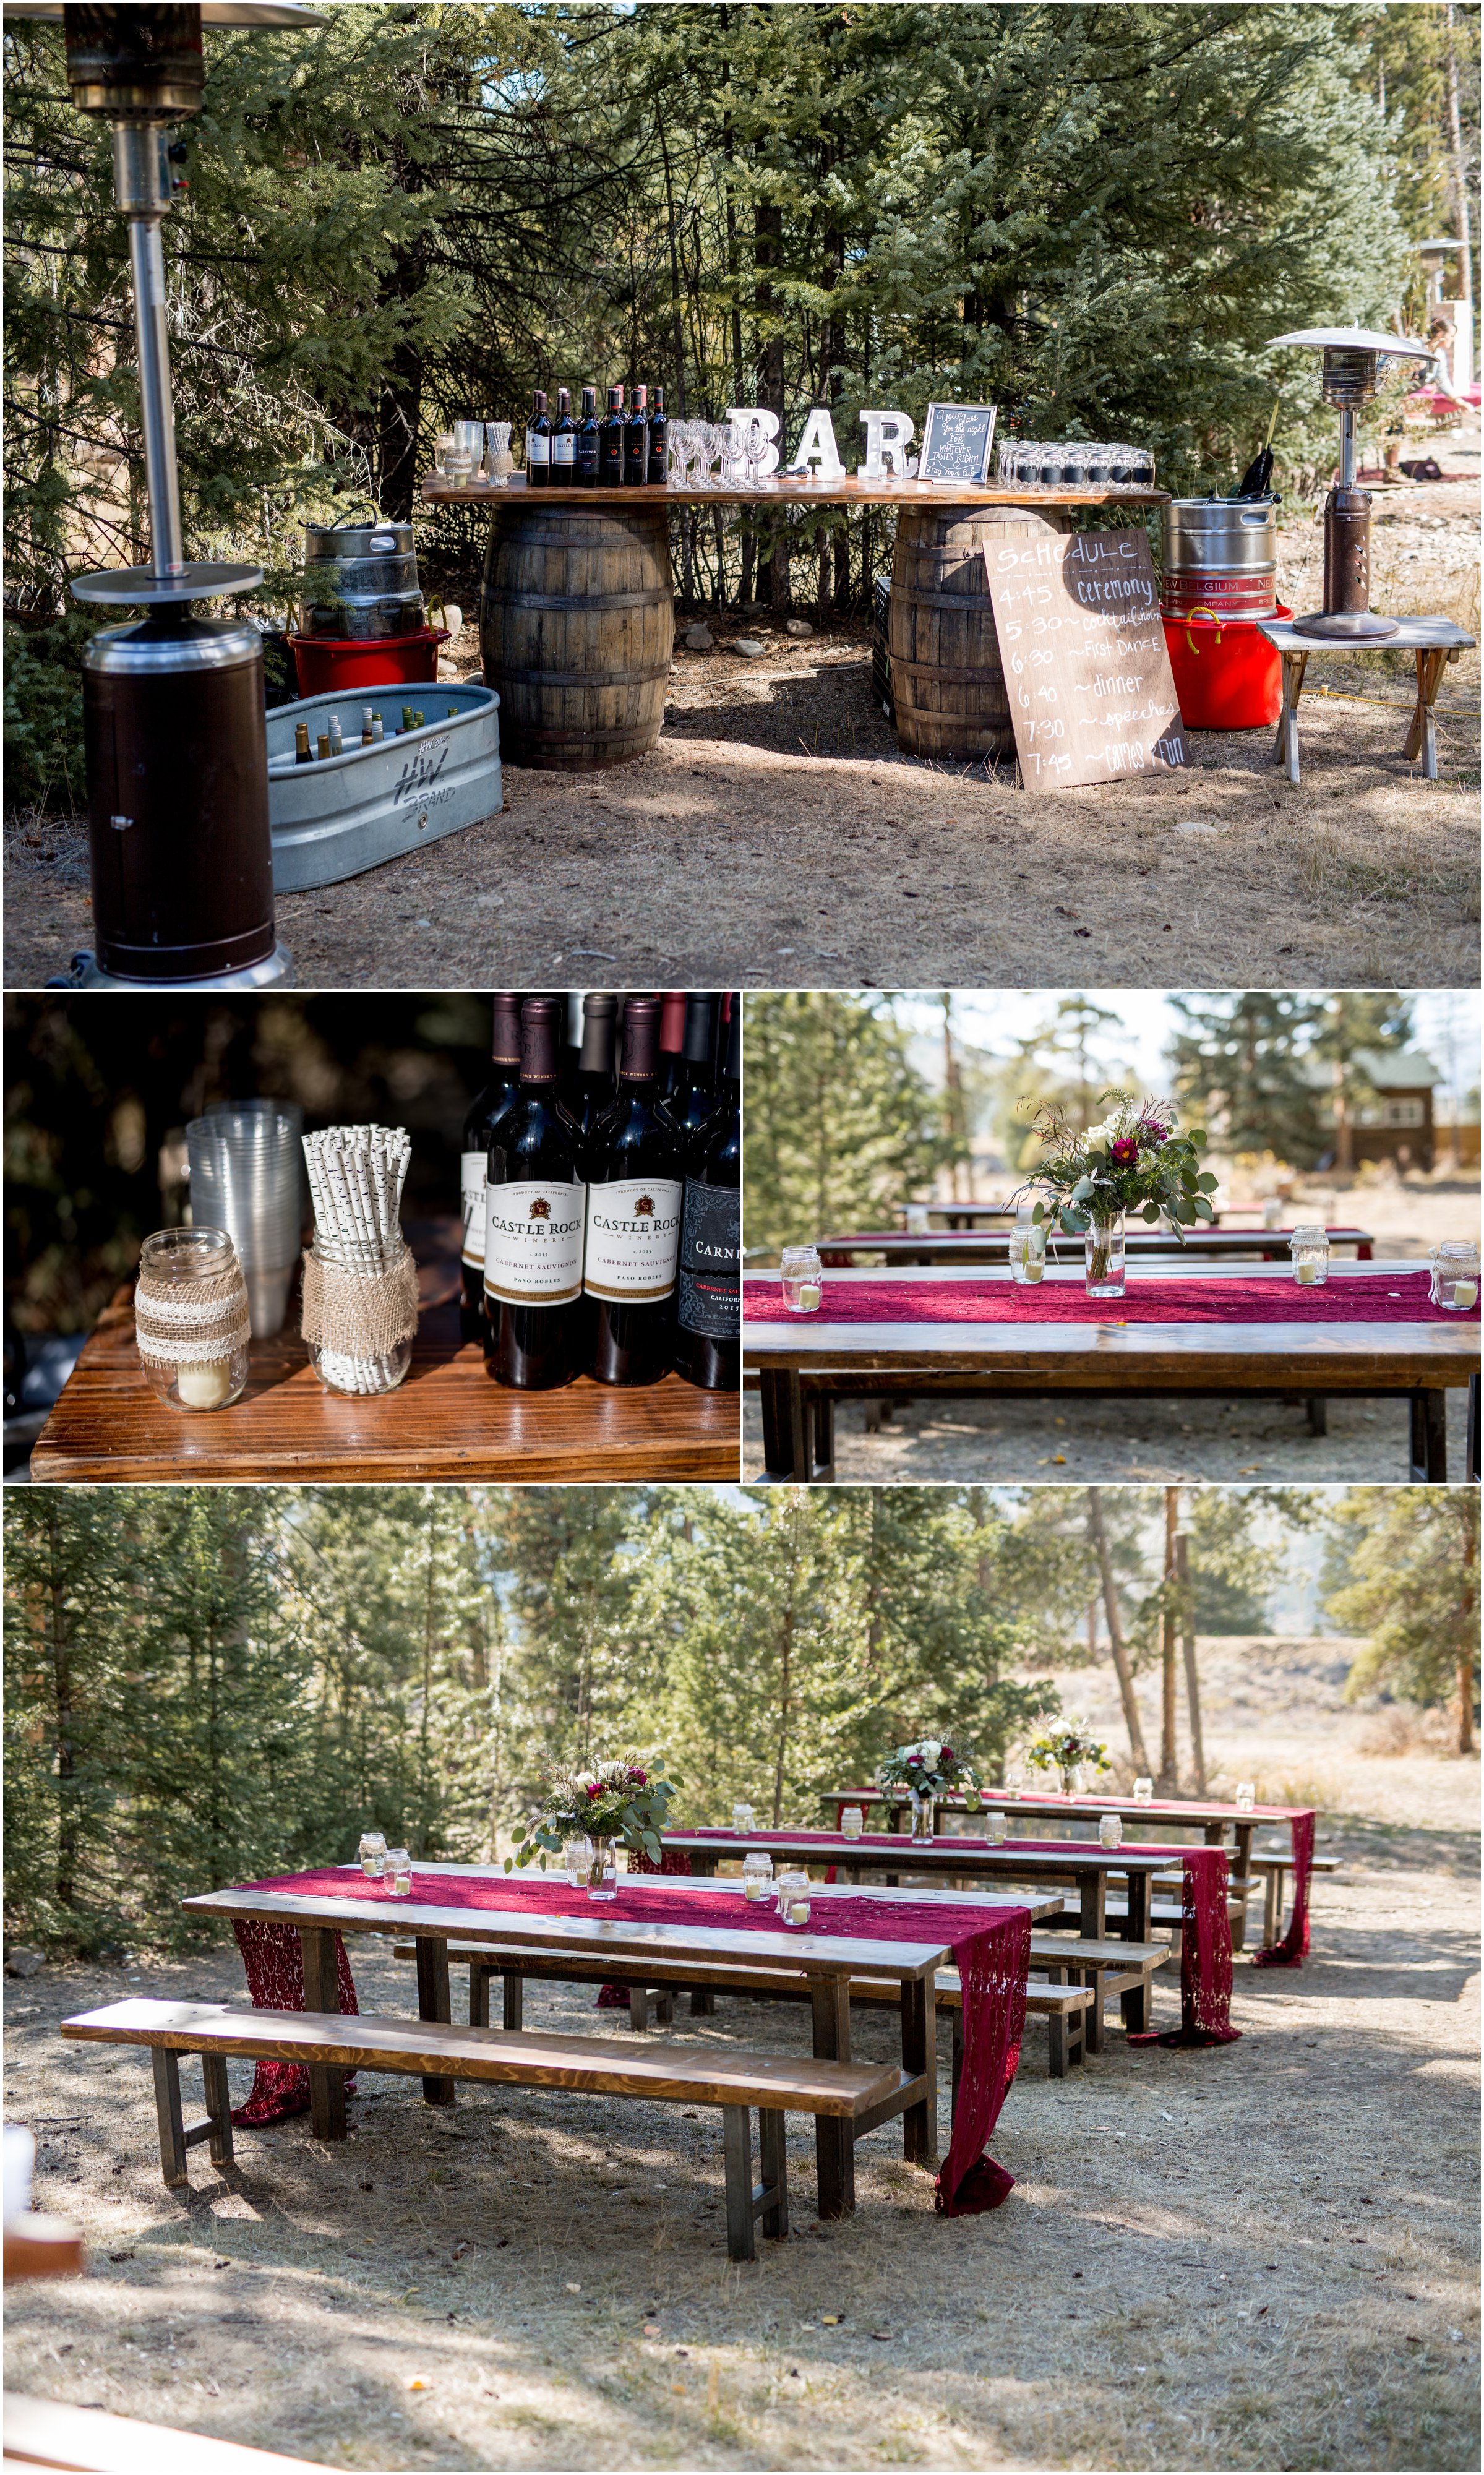 farmhouse tables with red table runners and mason jars sit outside under cafe lights near a creek